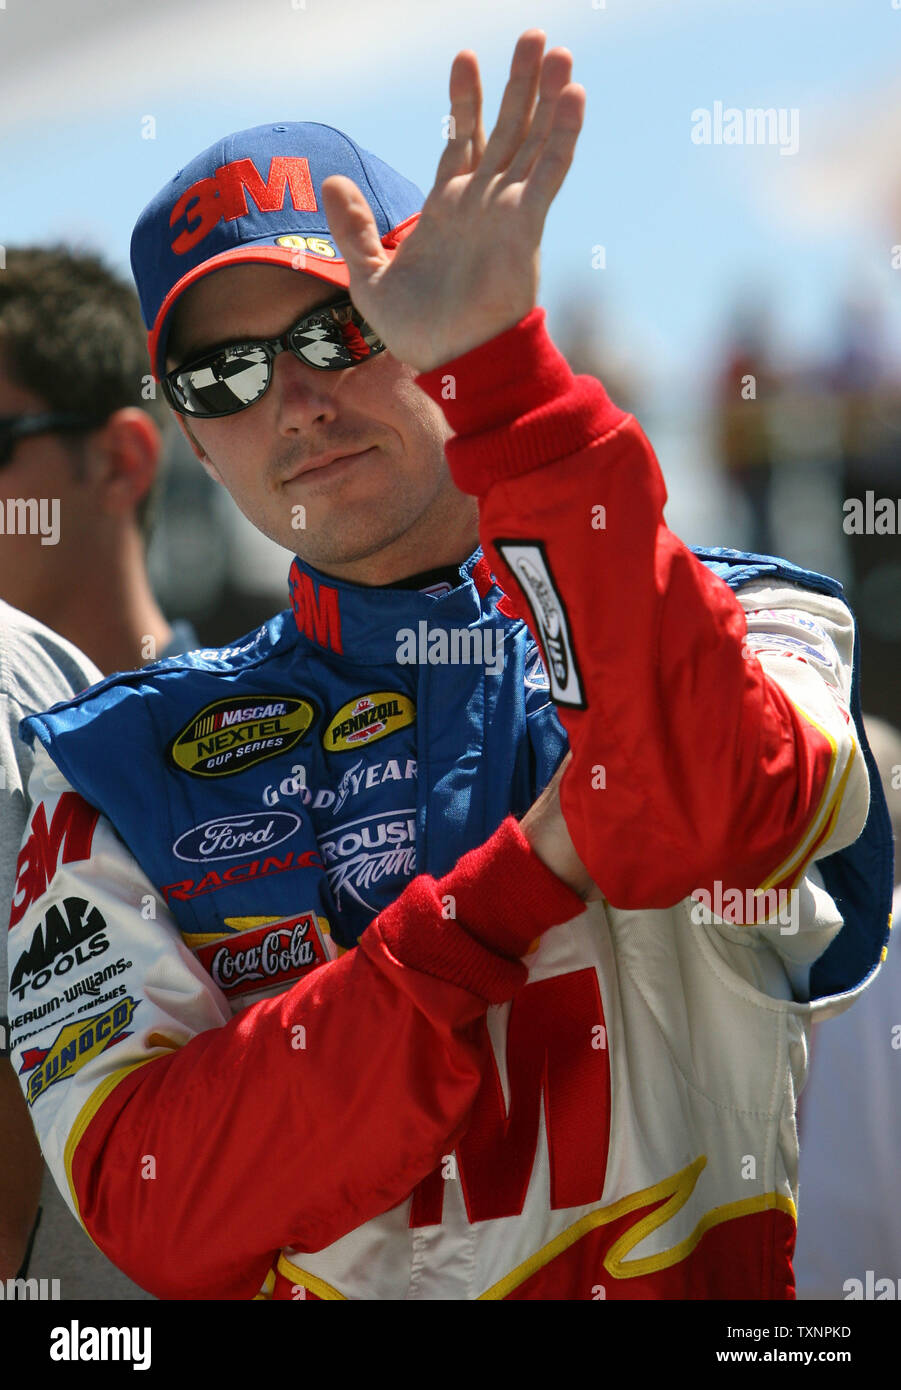 Nascar driver Todd Kluever waves during driver introductions for the GFS Marketplace 400 at the Michigan International Speedway in Brooklyn, Michigan on August 20, 2006.  Kluever did not finish the race due to an accident in lap 10. (UPI Photo/Scott R. Galvin) Stock Photo